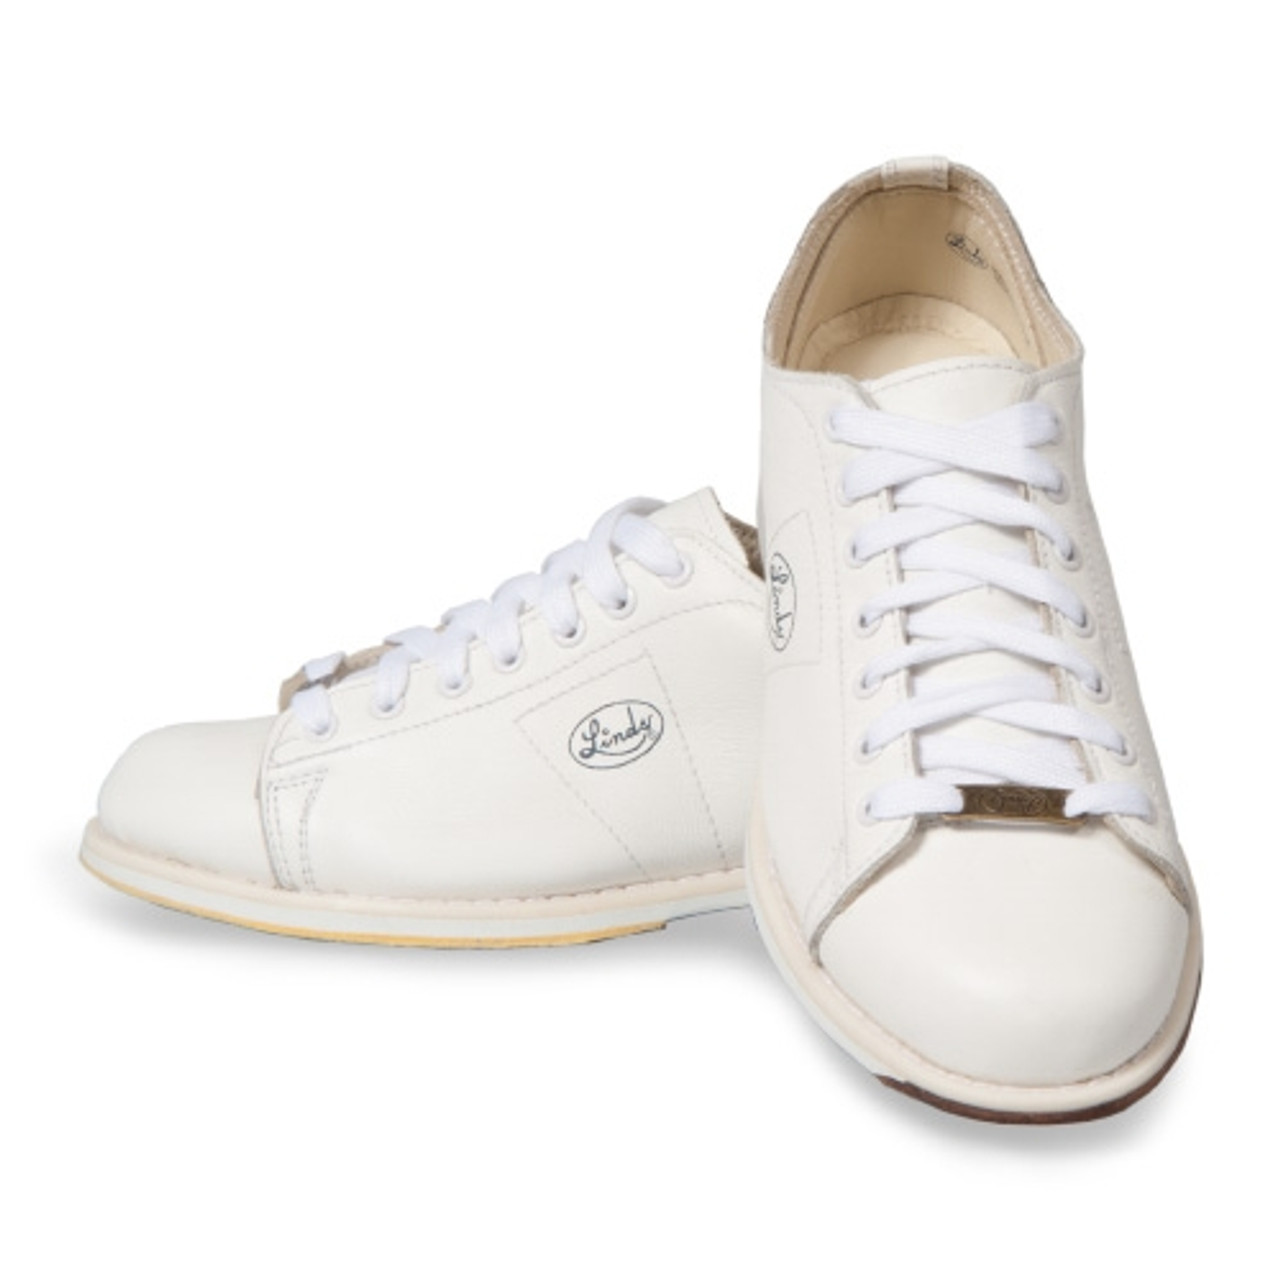 mens leather bowling shoes